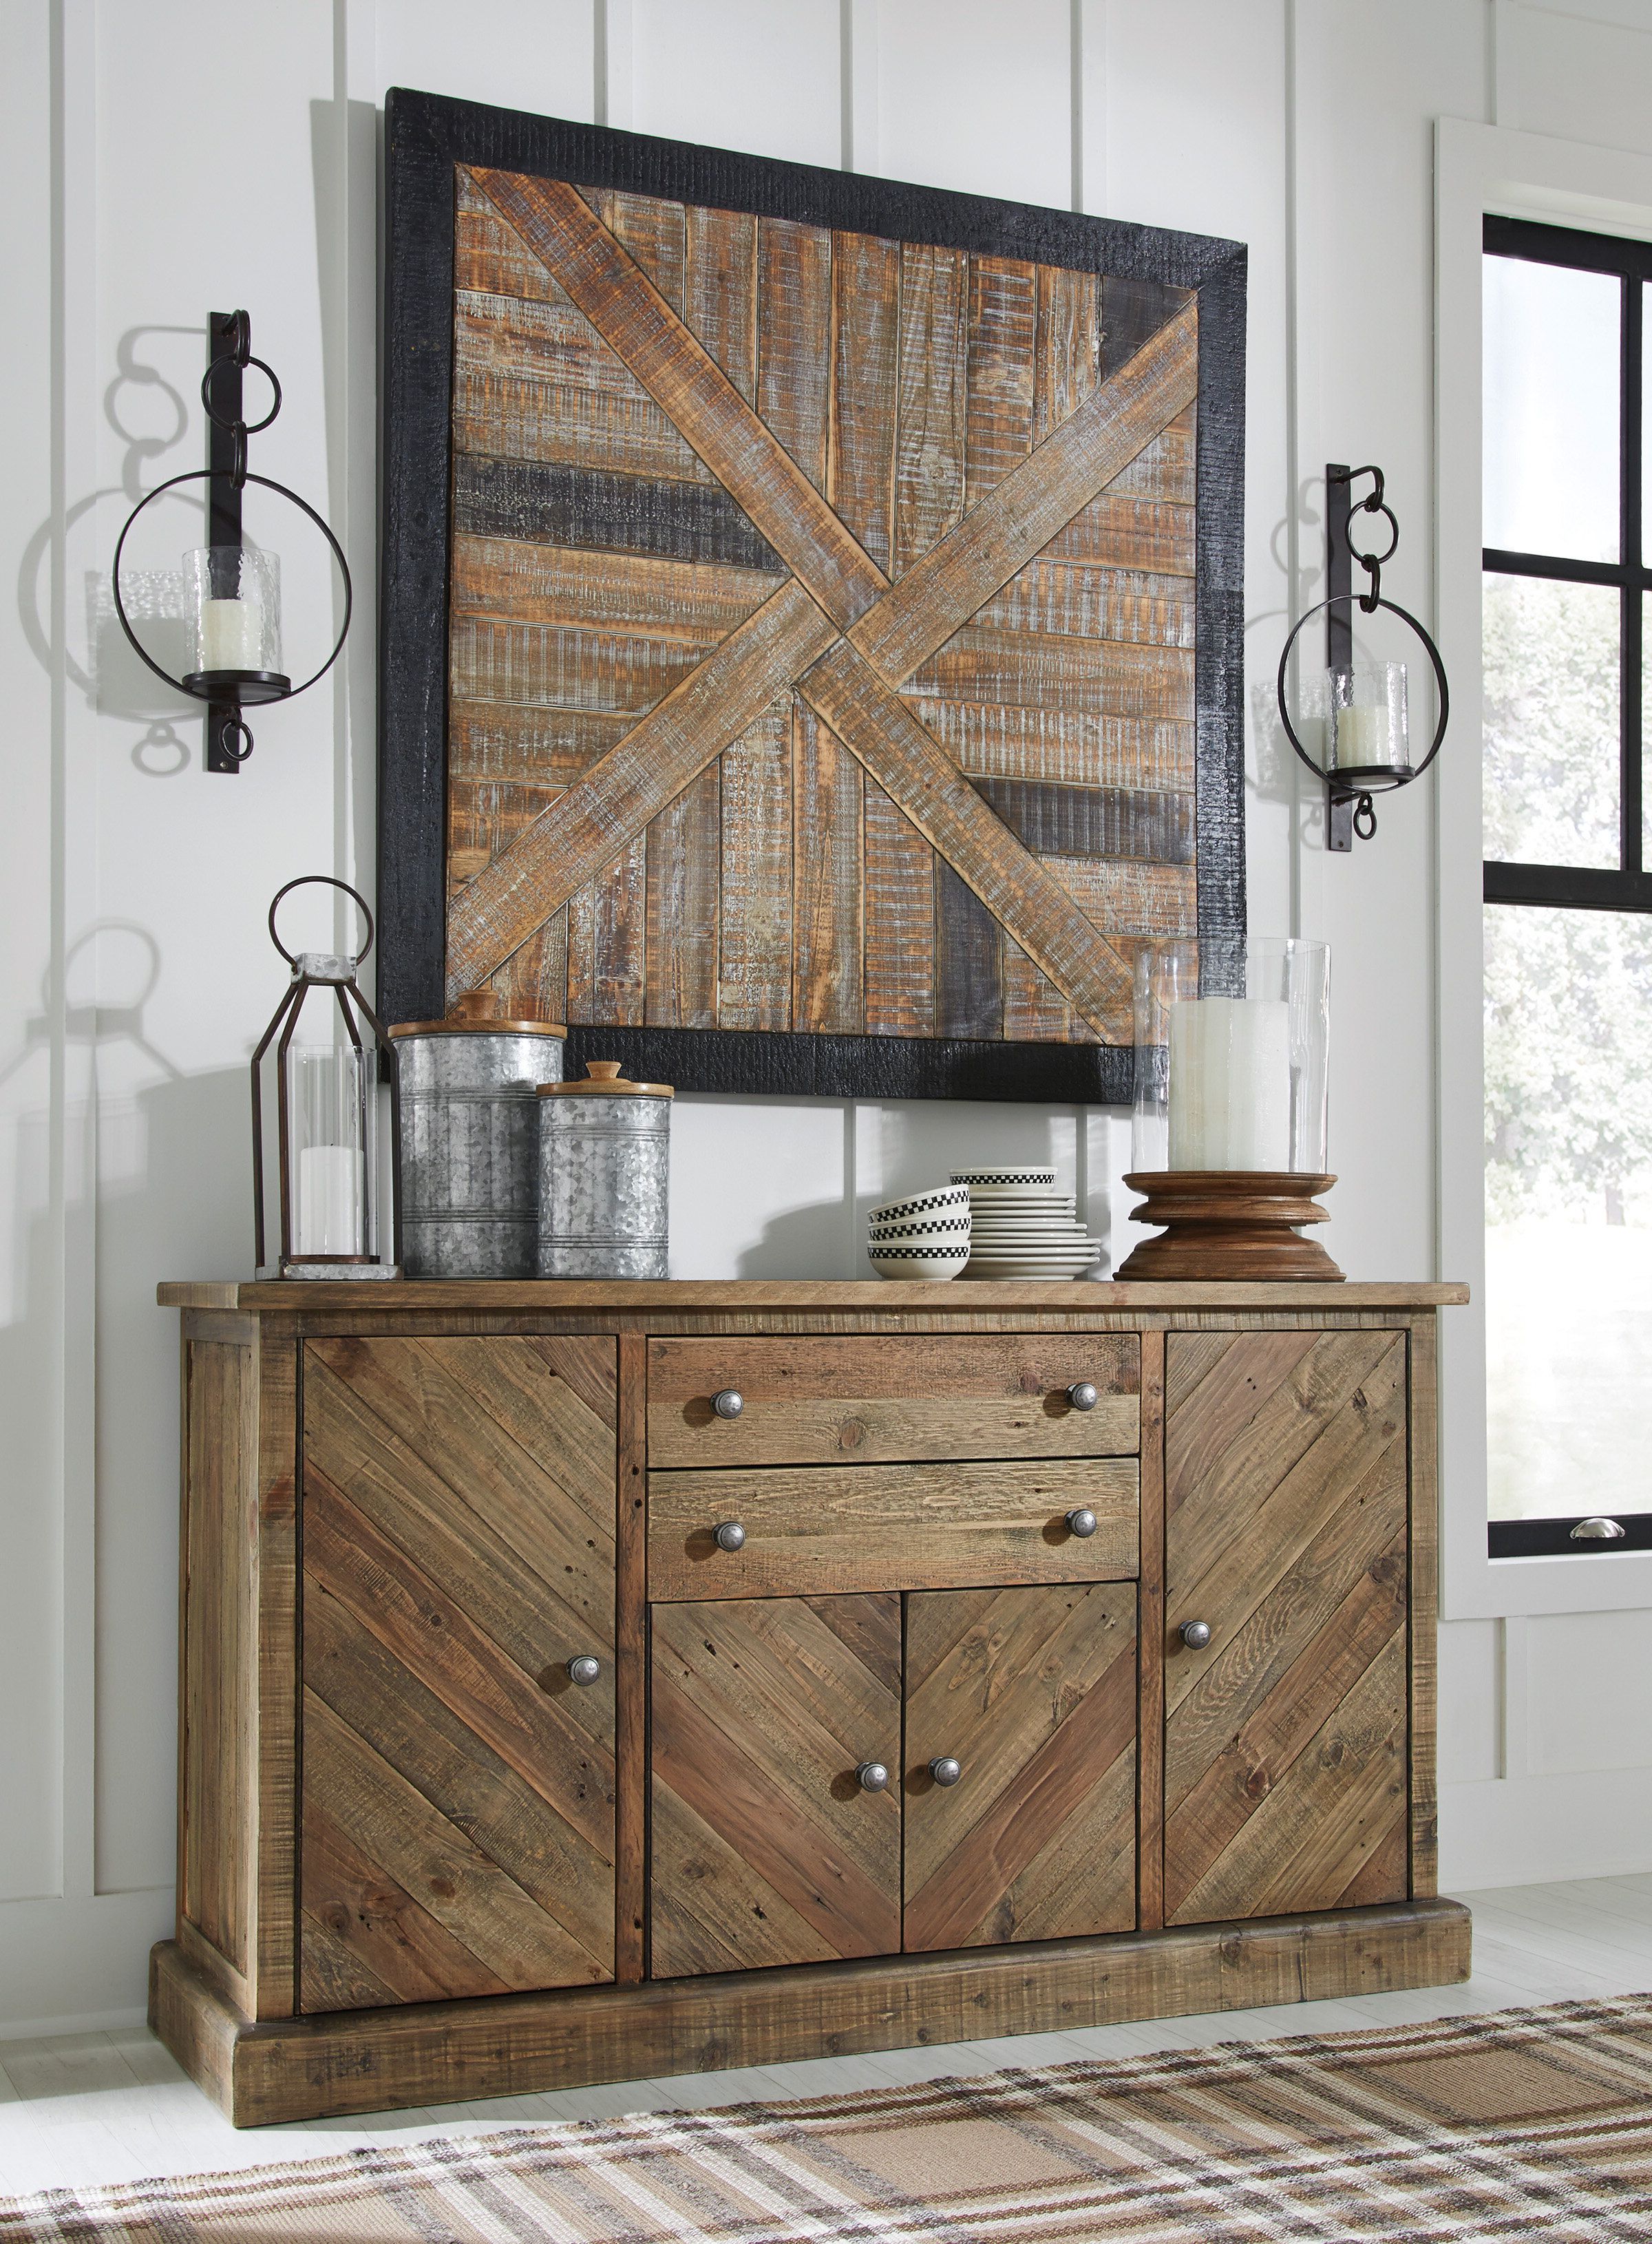 Sideboards & Buffet Tables | Joss & Main Regarding Chicoree Charlena Sideboards (View 16 of 20)